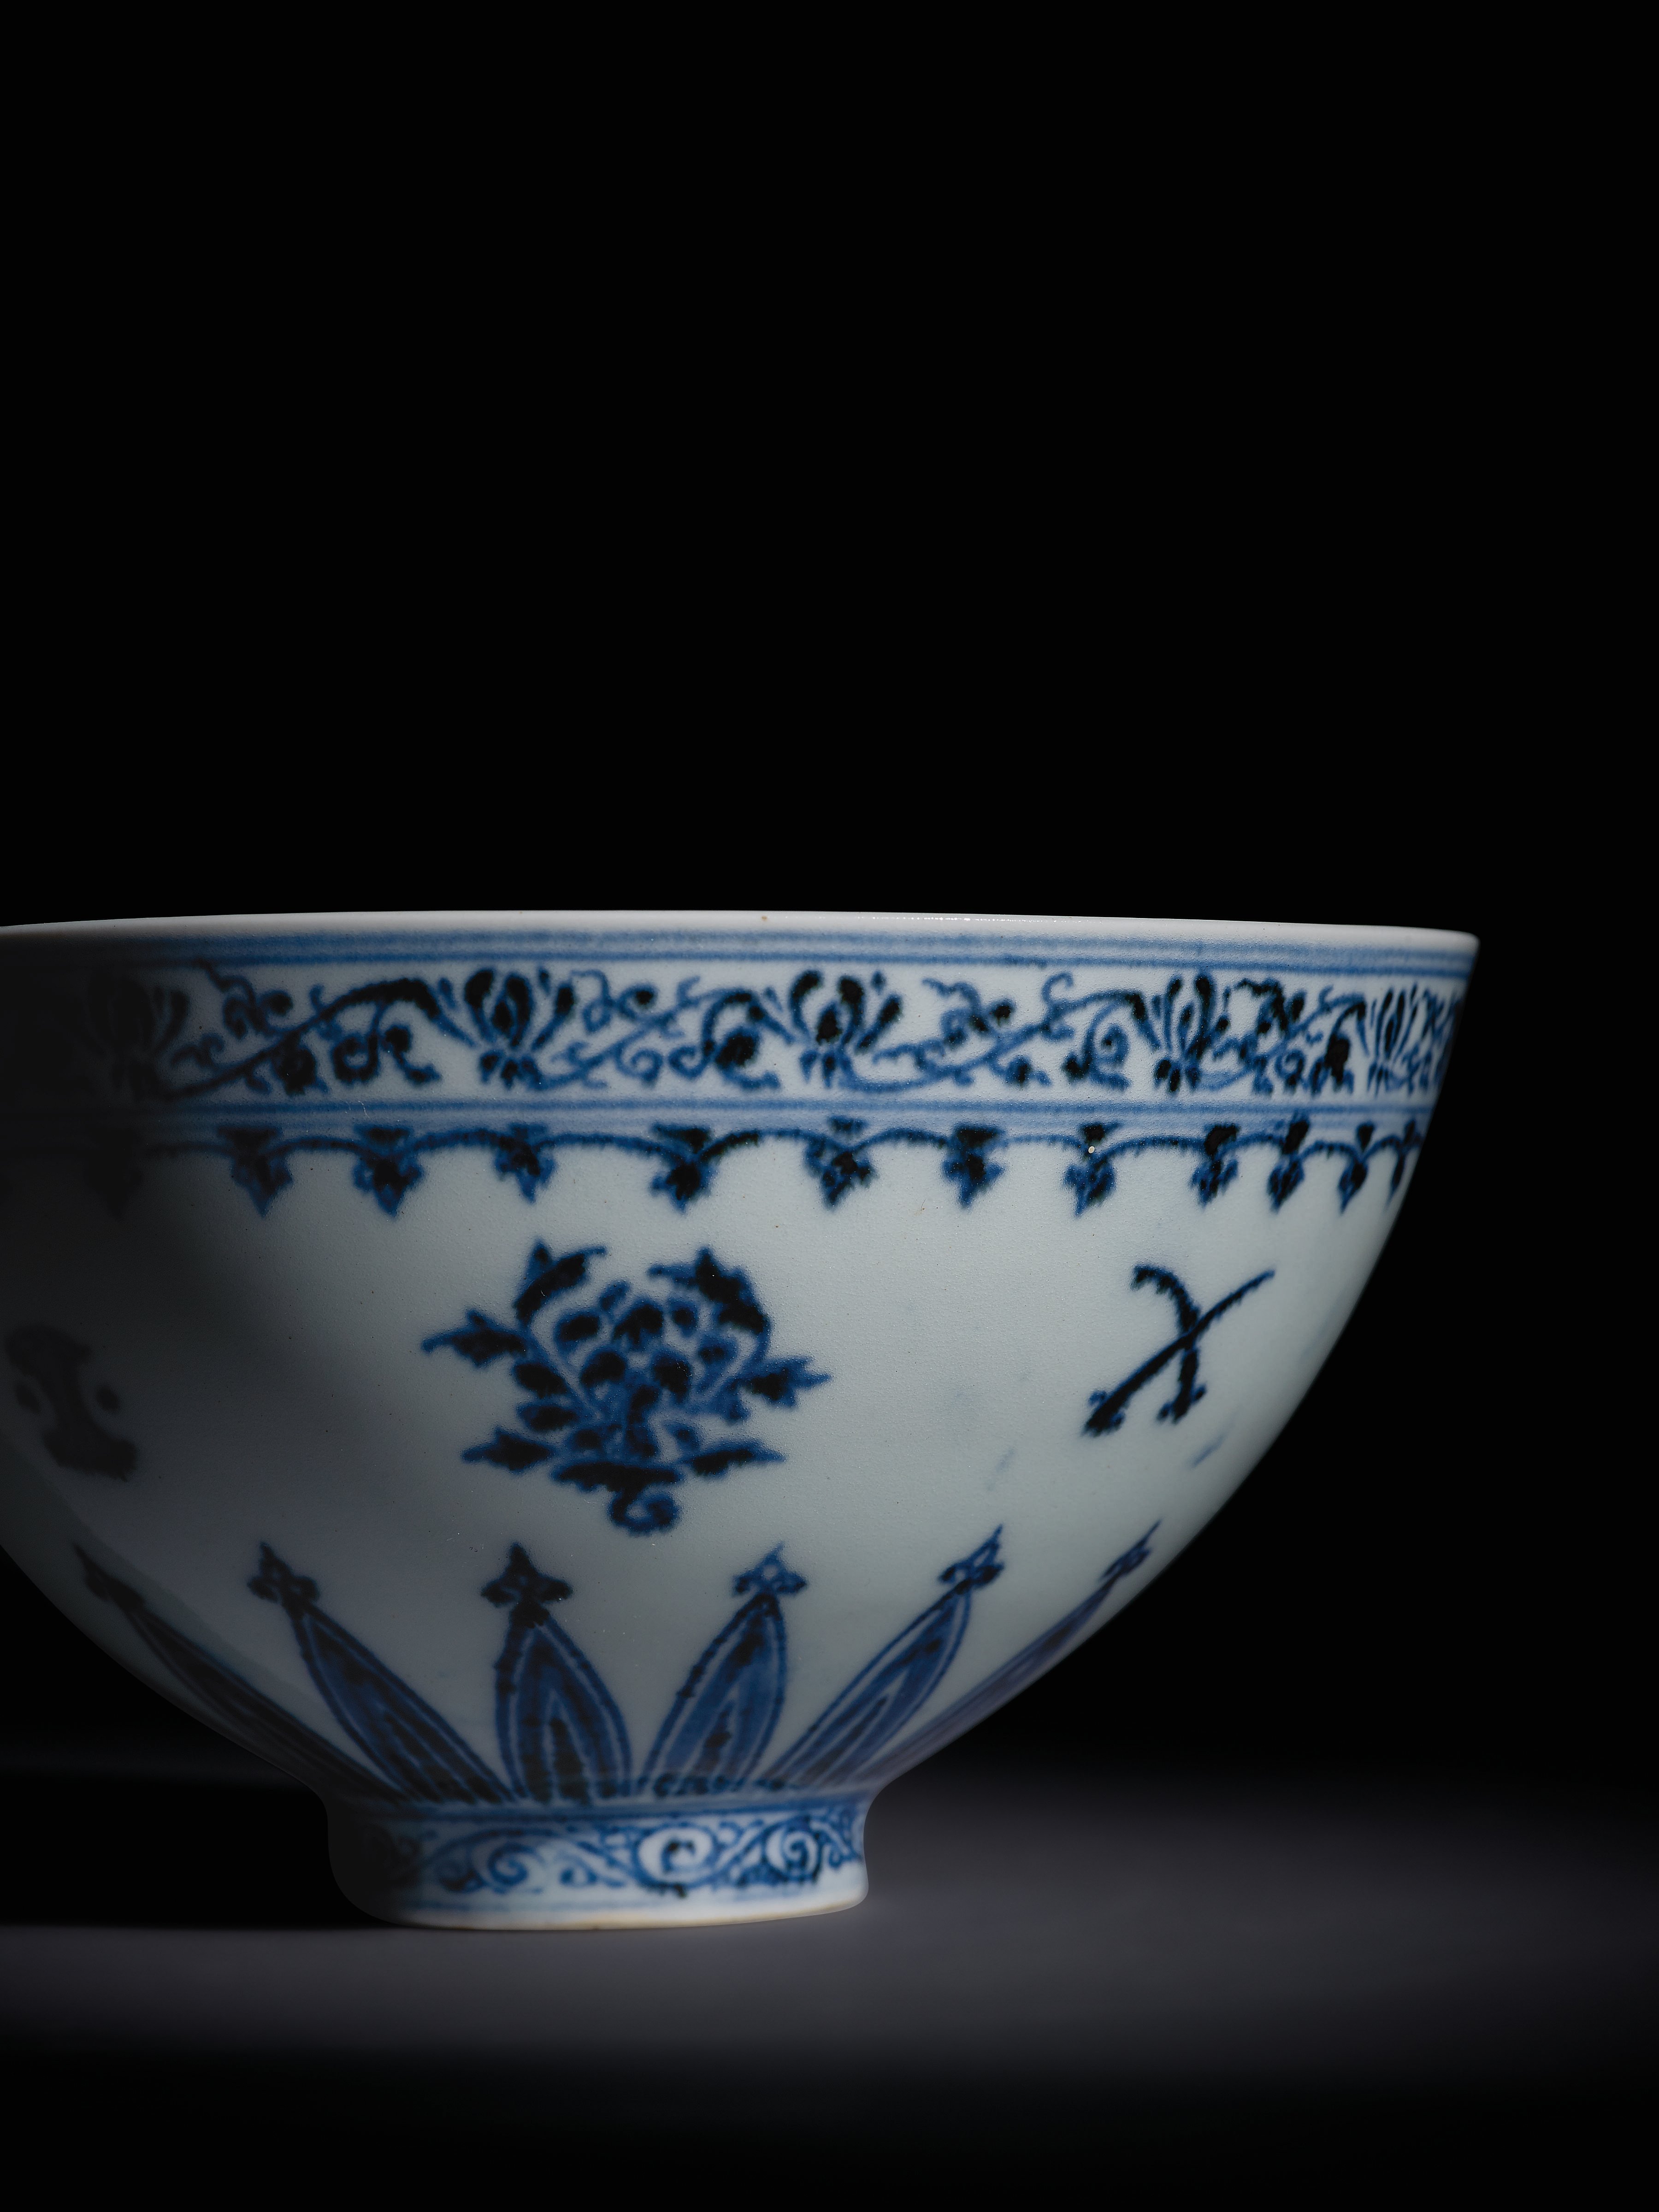 Blue and white "floral" bowl, Ming Dynasty, Yongle Period. Image courtesy of Sotheby's.